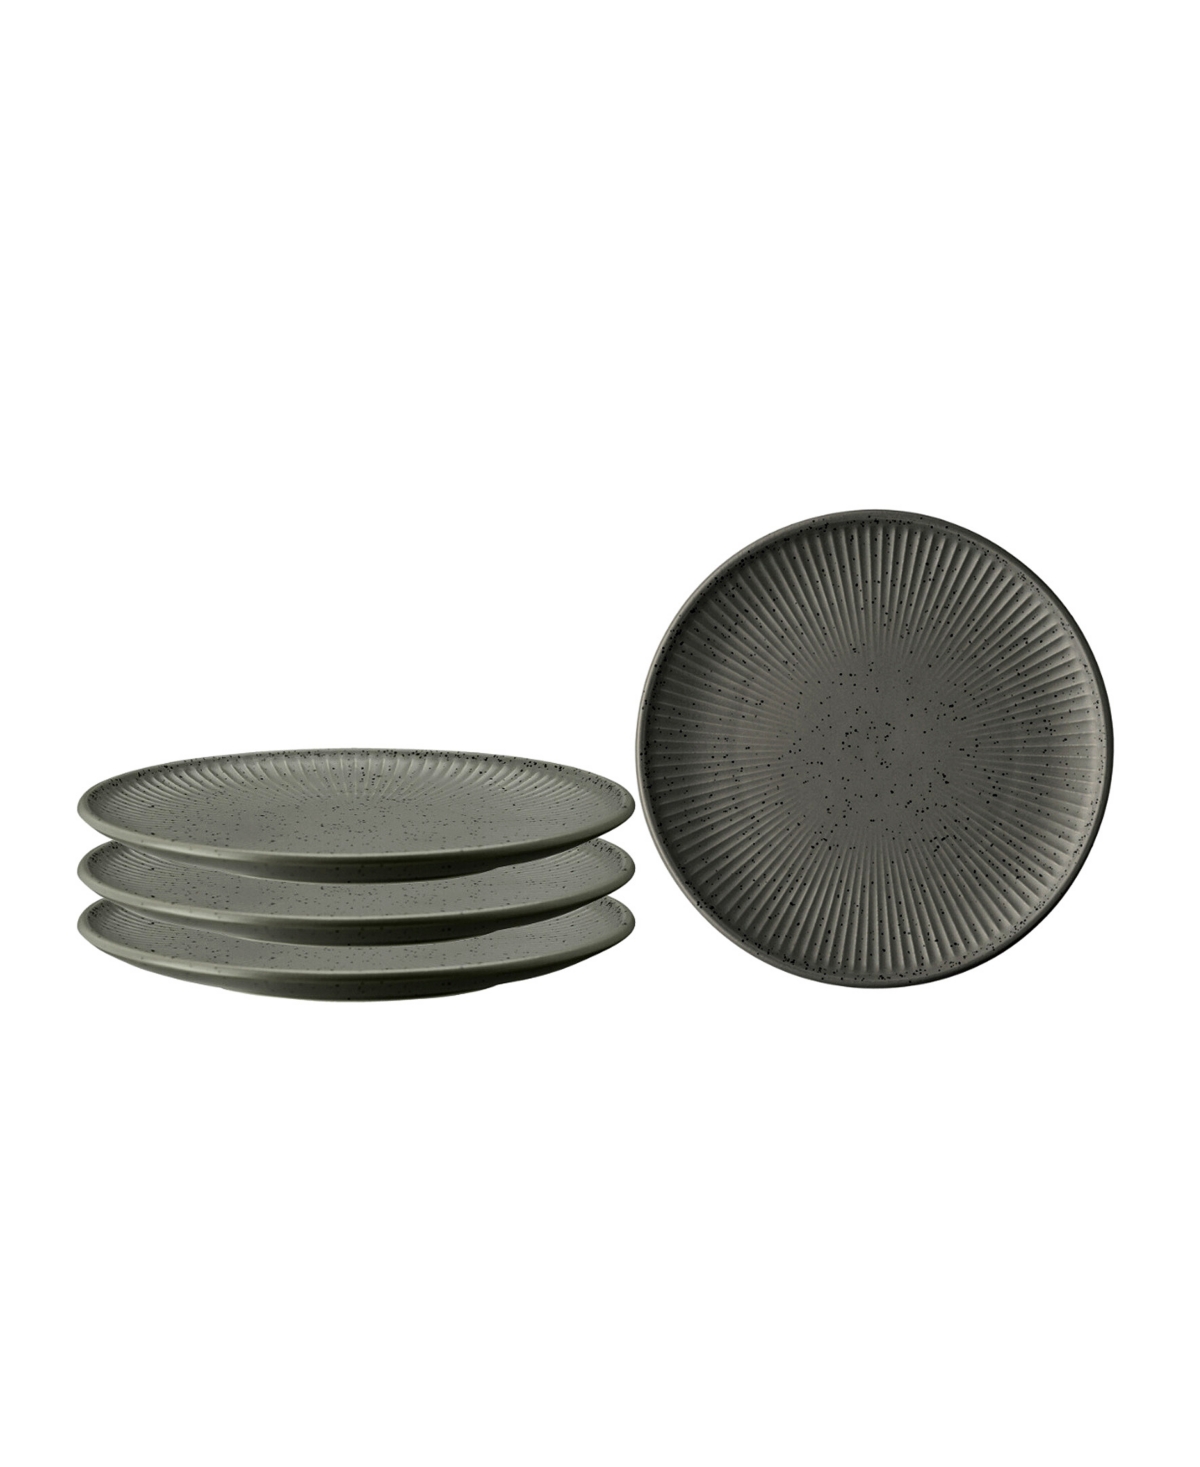 Clay Set of 4 Bread Butter Plates, Service for 4 - Gray